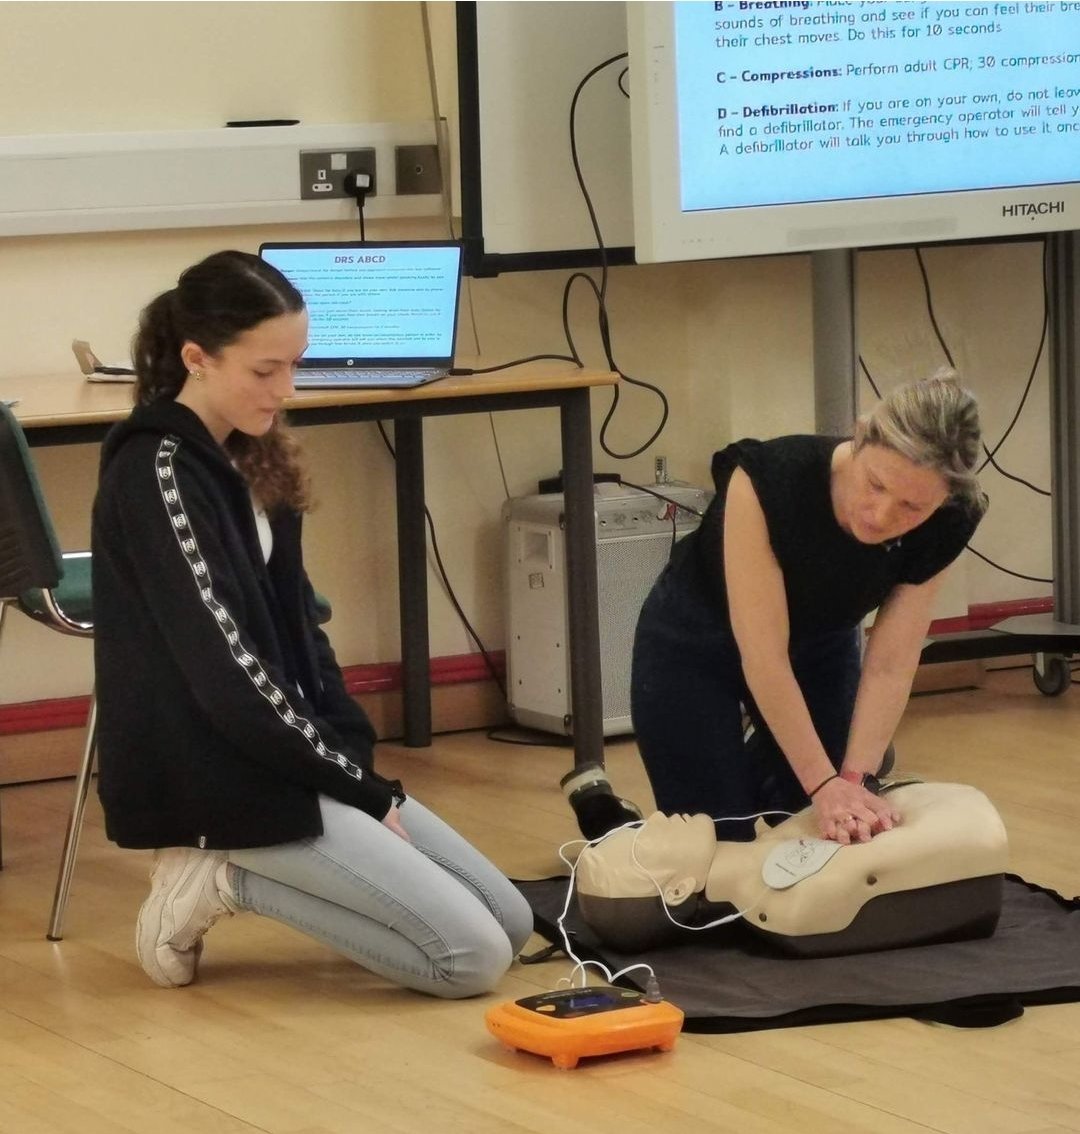 To all you SW London dwellers, we have 2 spaces on our FREE basic lifesaving training with Chris on Thursday night from 7.30pm in Mitcham Lane Baptist Church. Book here: thepaulalanproject.org/training You never know when you might need to use the most important skills you'll ever learn